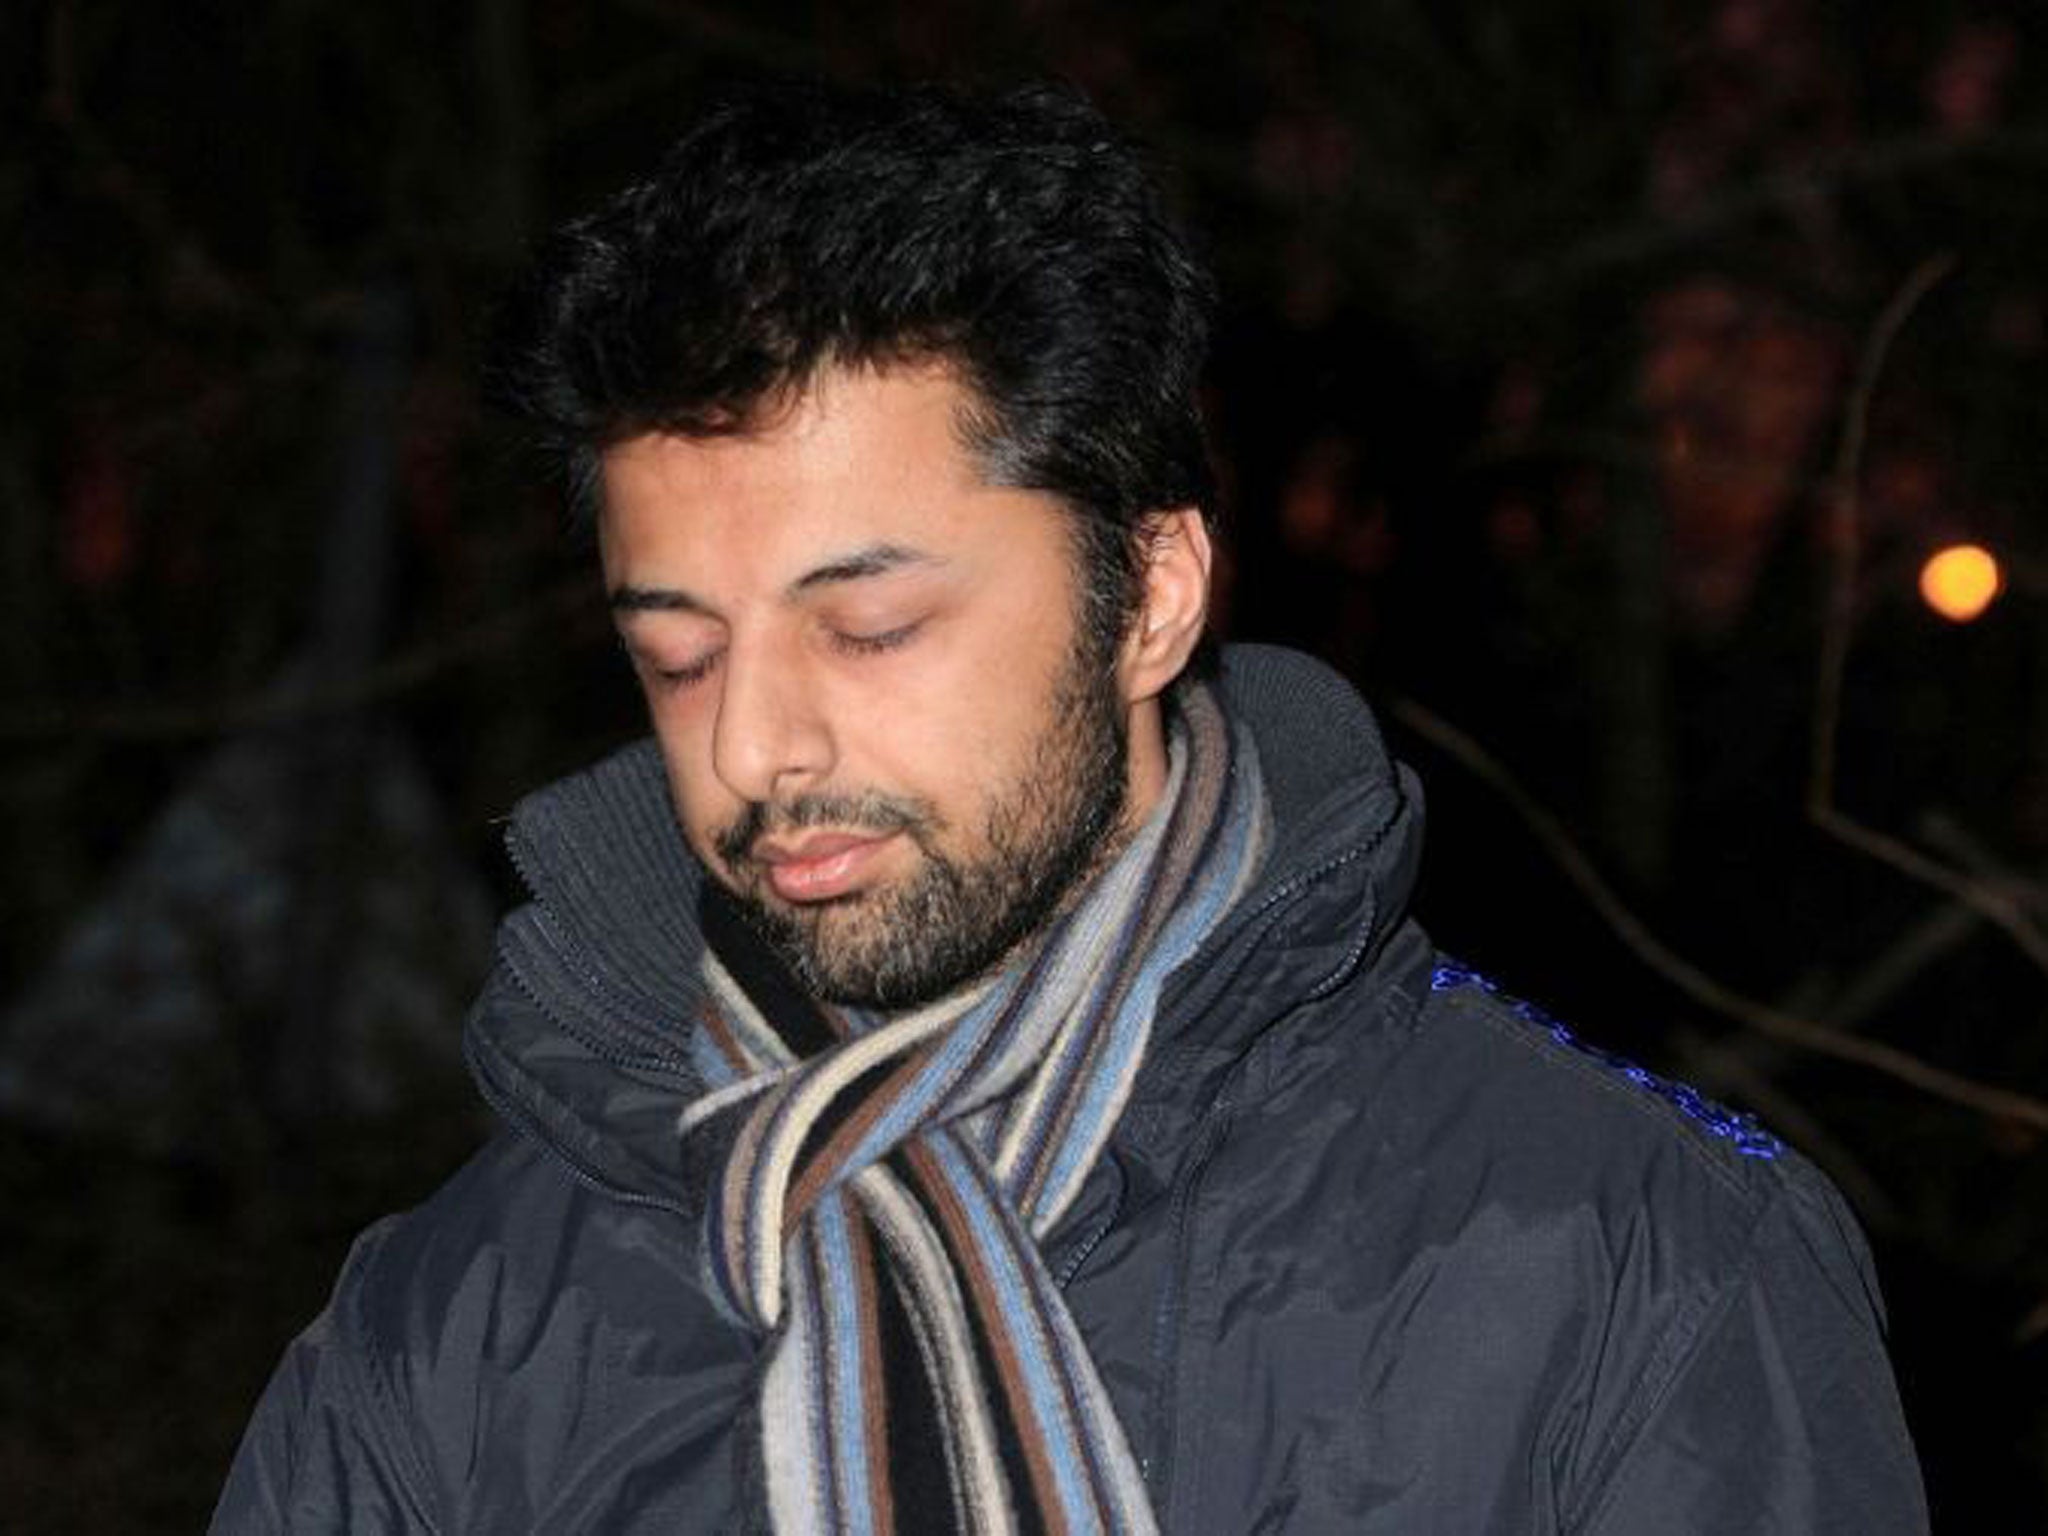 Dewani is expected to arrive in Cape Town on Tuesday morning, where he will be taken straight to a court hearing